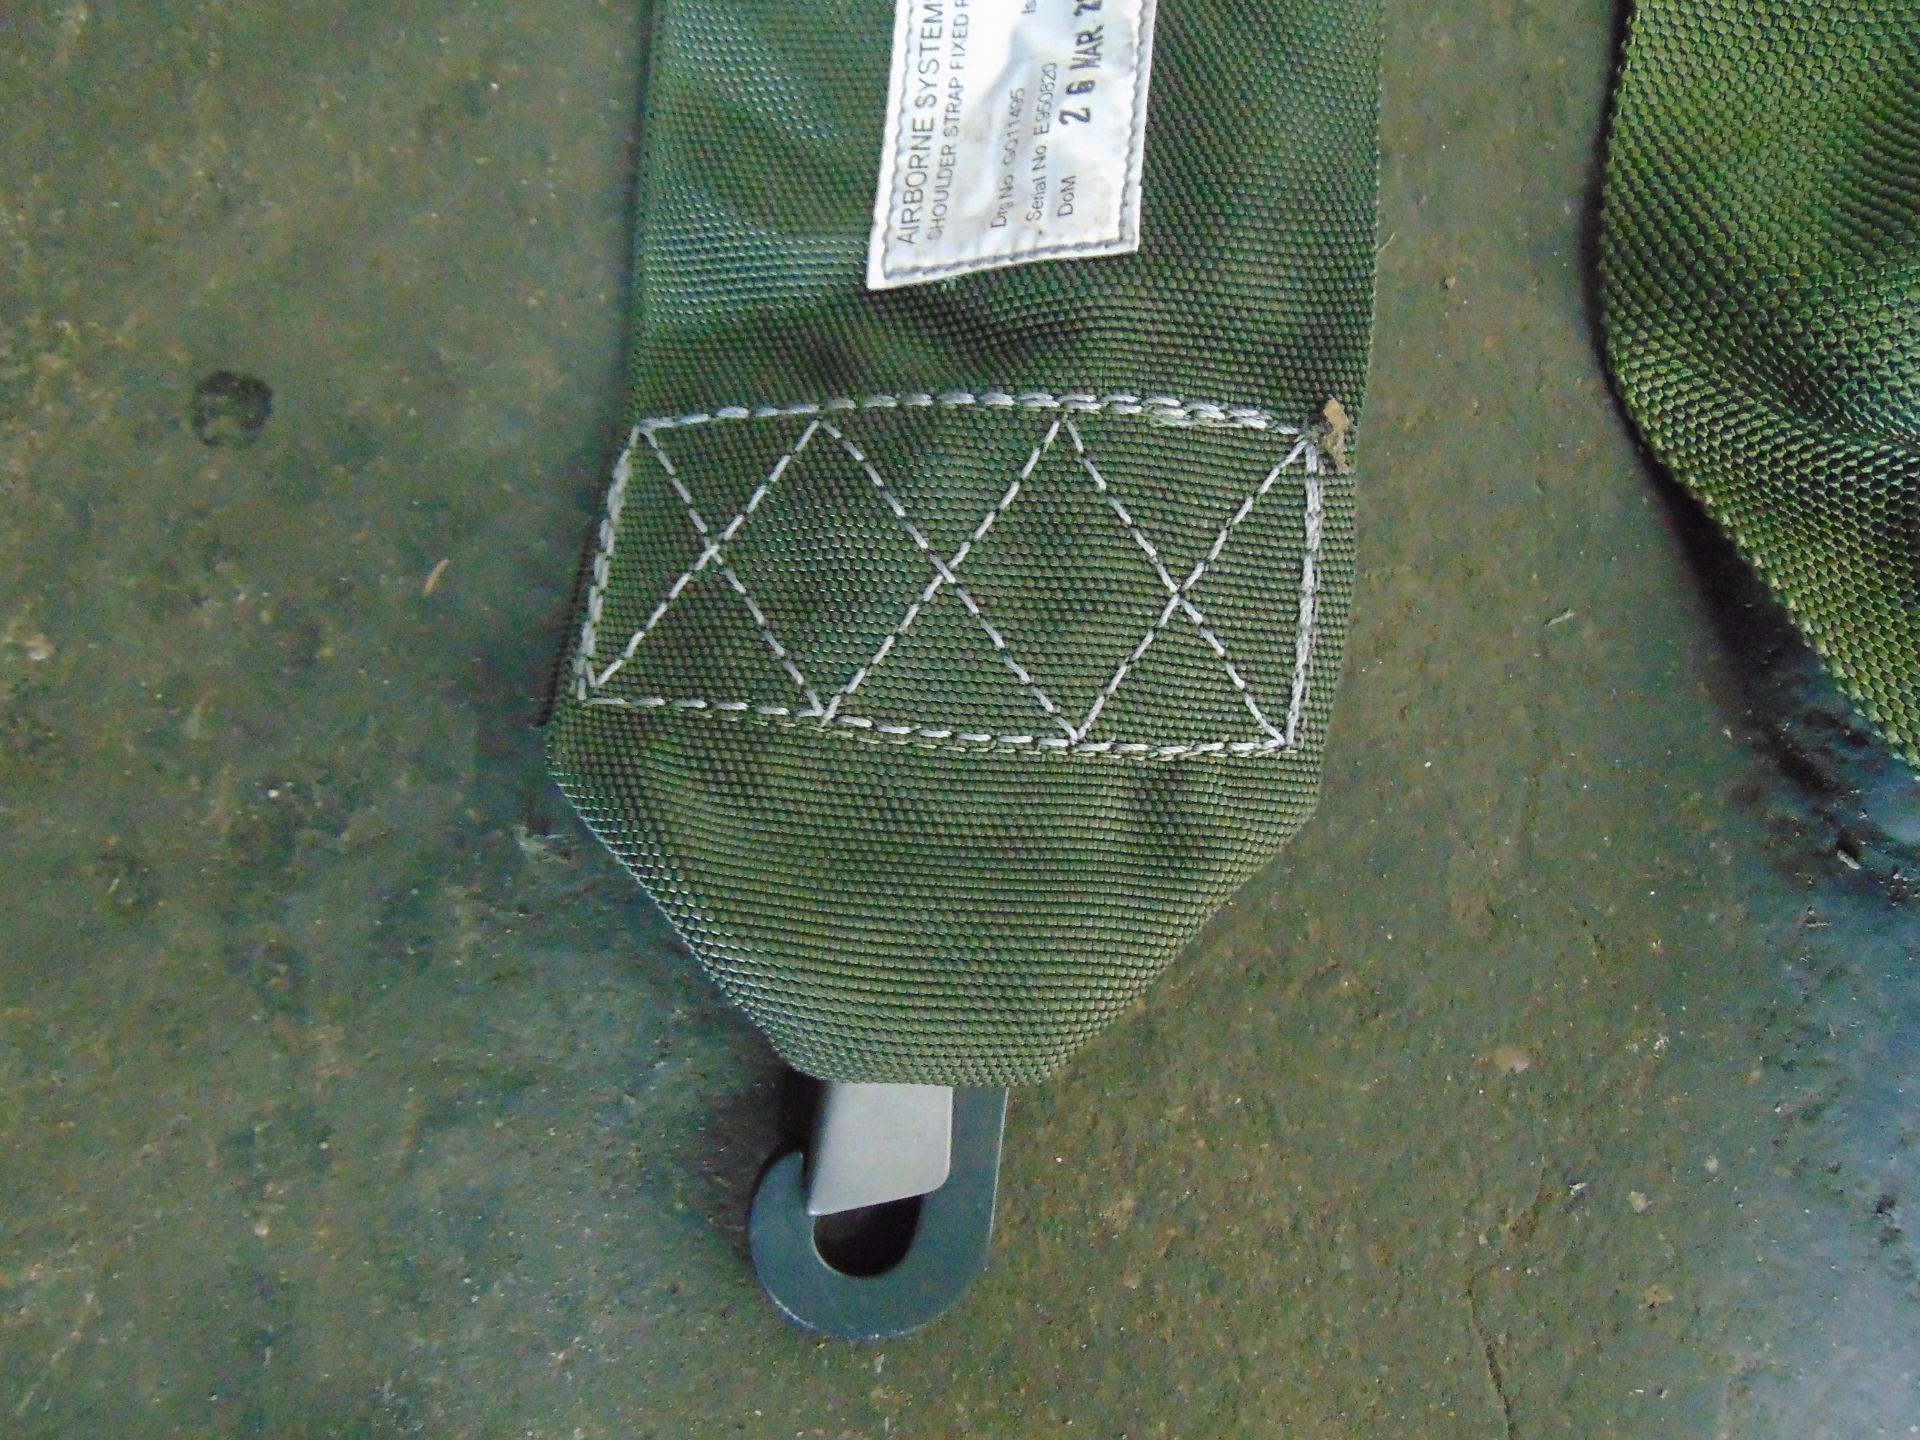 10 x Airborne Systems Ltd Casualty Saftey Harnesses - Image 6 of 7